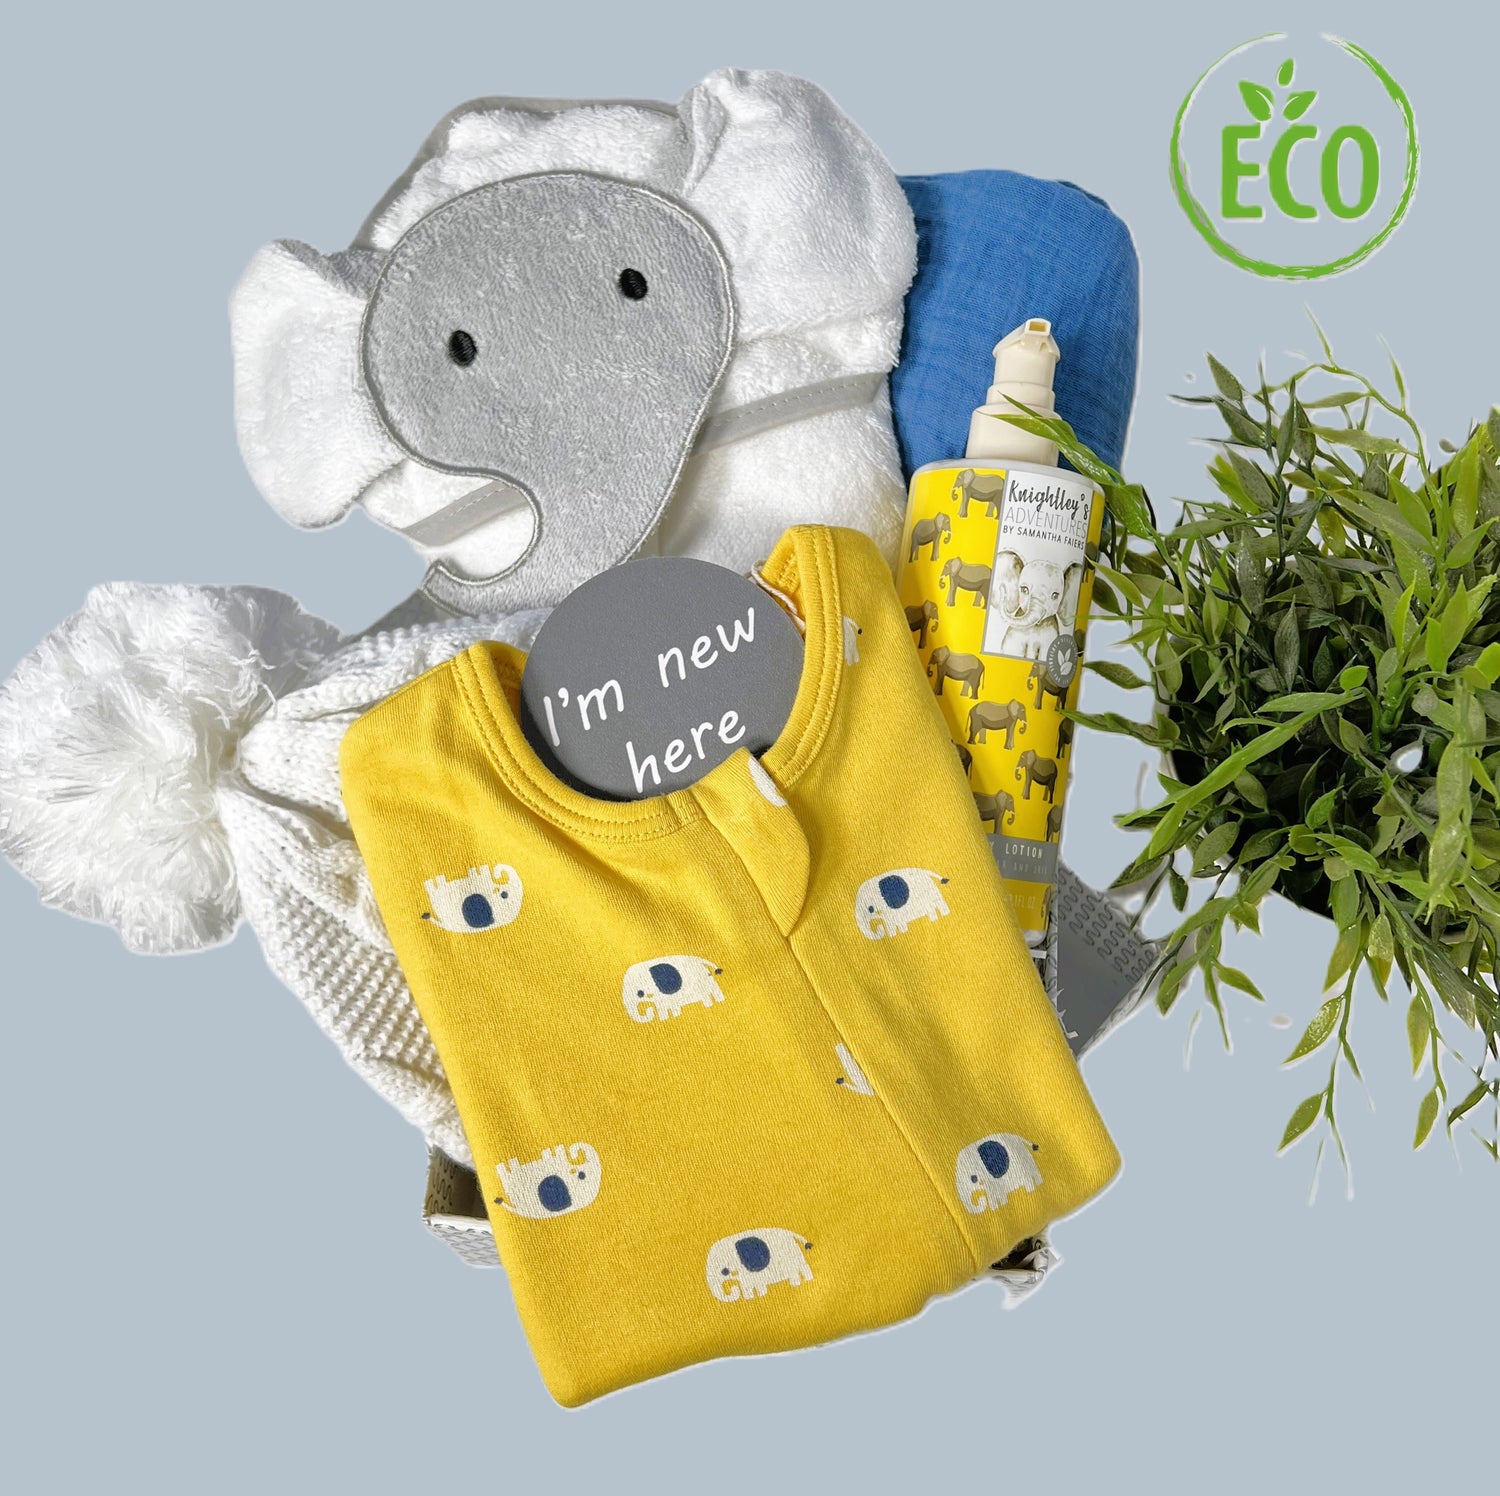 Elephant themed new baby gift with a white cotton hooded baby towel with grey elephant face, a organic cotton zipped baby sleepsuit in yellow with a navy blue and white elephant print, a bootle of paraben freen baby lotion, a very large baby muslin swaddle blanket , a white baby pompom hat all in a hand crafted silver and white baby keepsake box.